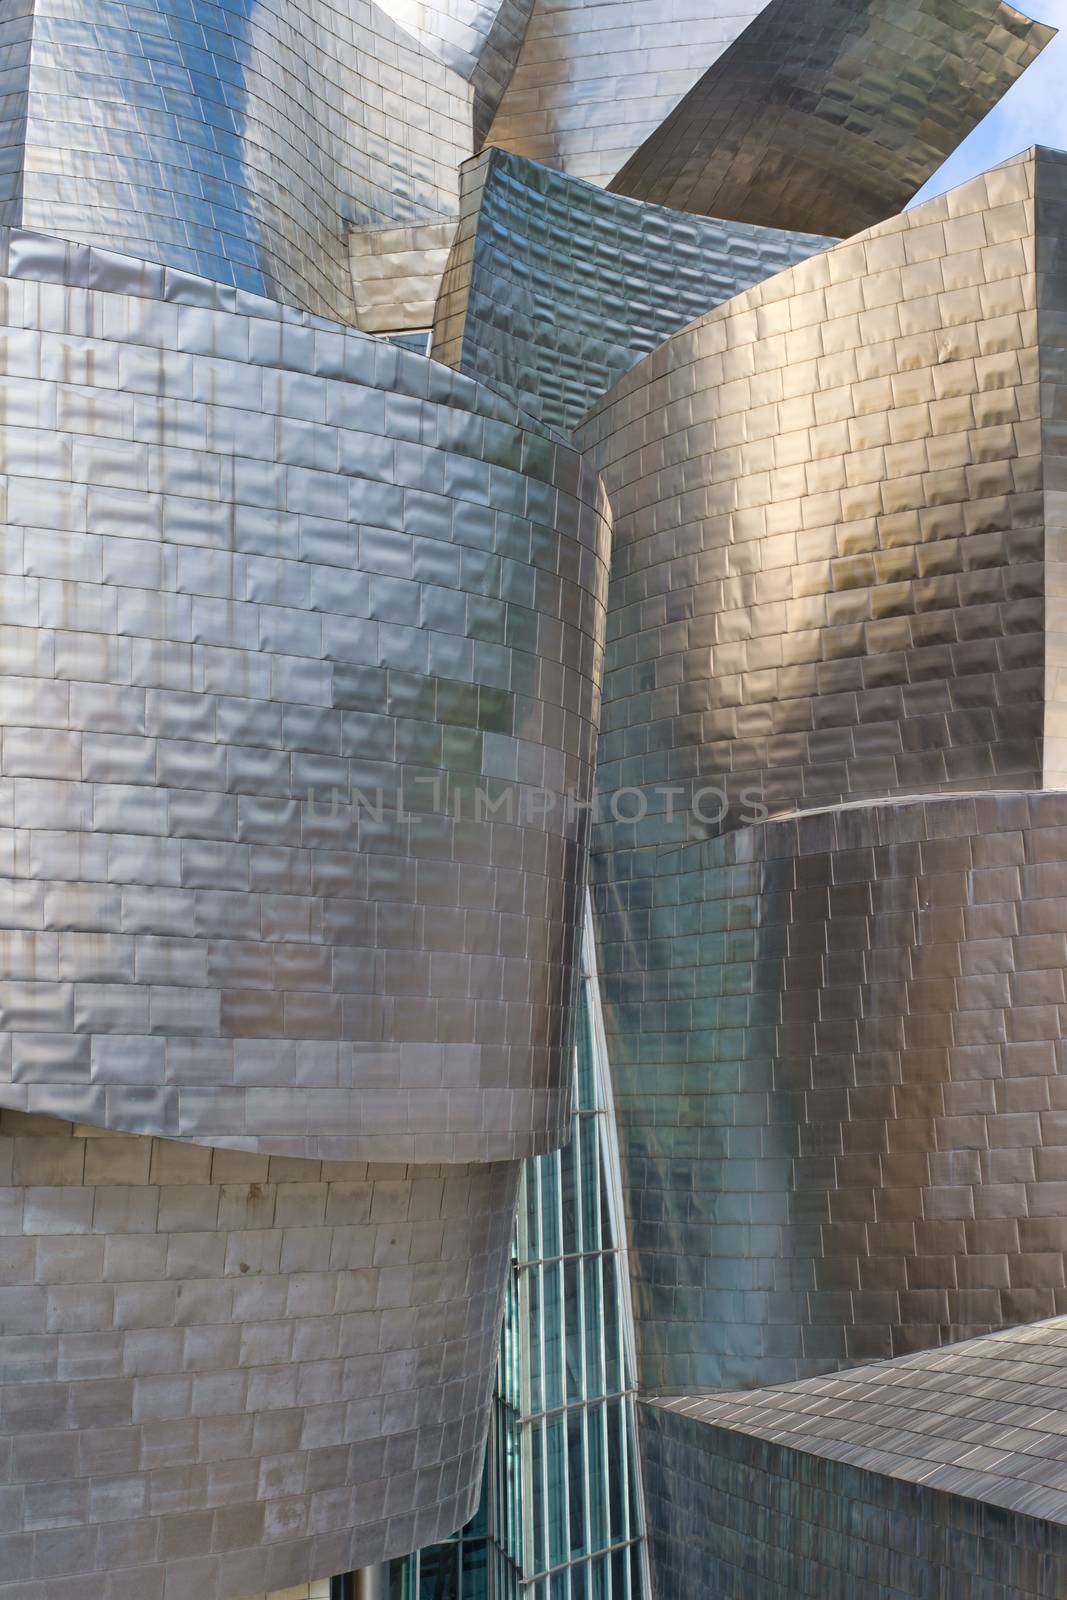 Details and close-up of the architecture of the Guggenheim Museum in Bilbao, Spain by kb79